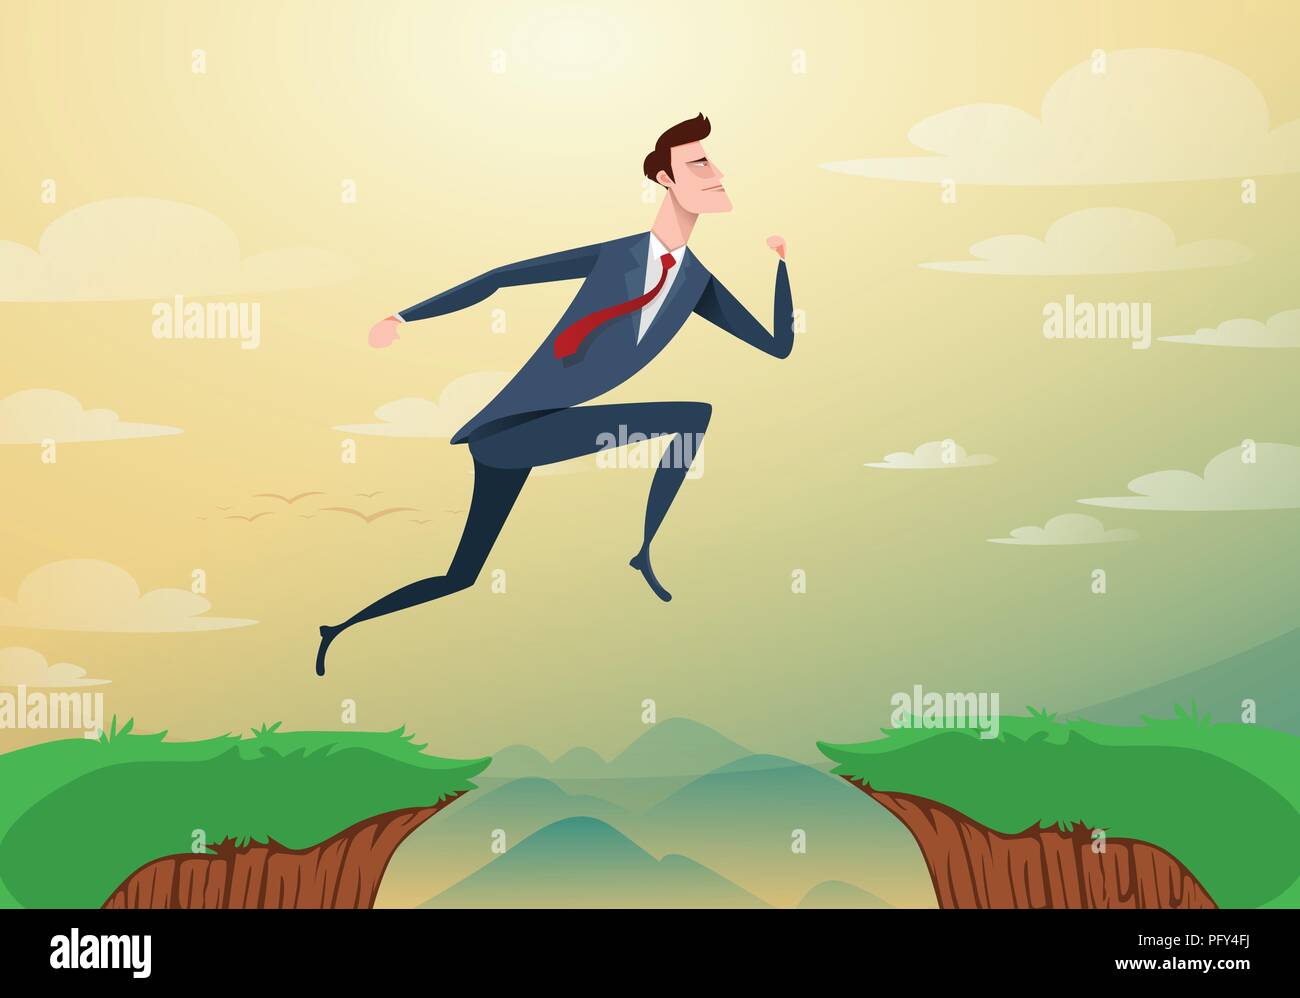 Businessman jump through the gap obstacles between hill to success. Running and jump over cliffs. Business risk and success concept. Cartoon Vector Illustration. Stock Vector